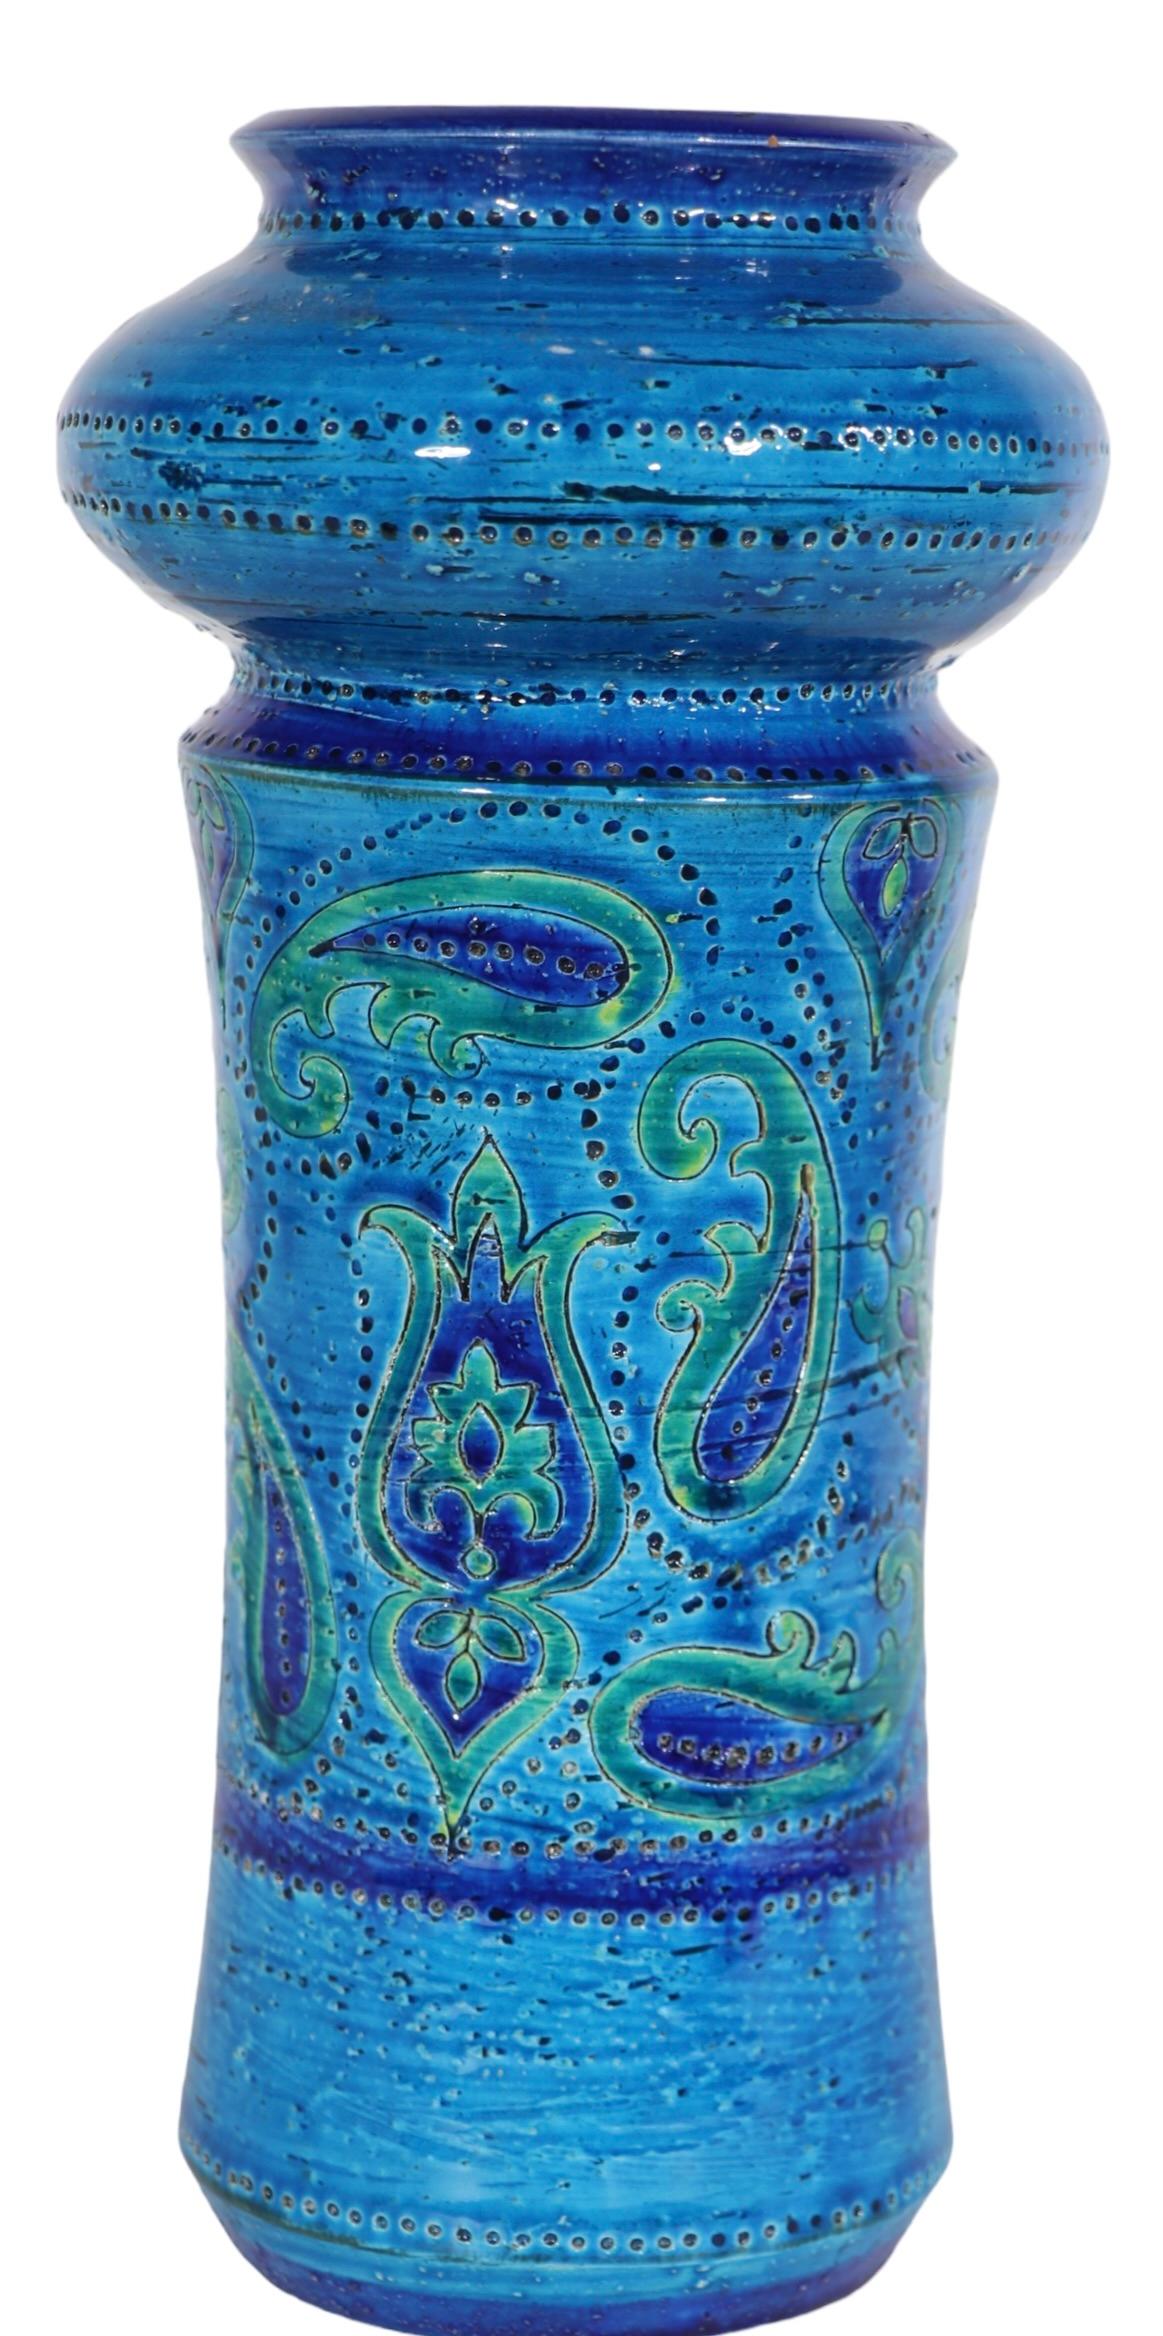 Classic Mid Century Italian pottery vase with incised decoration, signed Italy numbered, and retains its  original Rosenthal Netter paper label. The vase features the classic Rimini blue and green. glaze with paisley decorative motifs. Circa